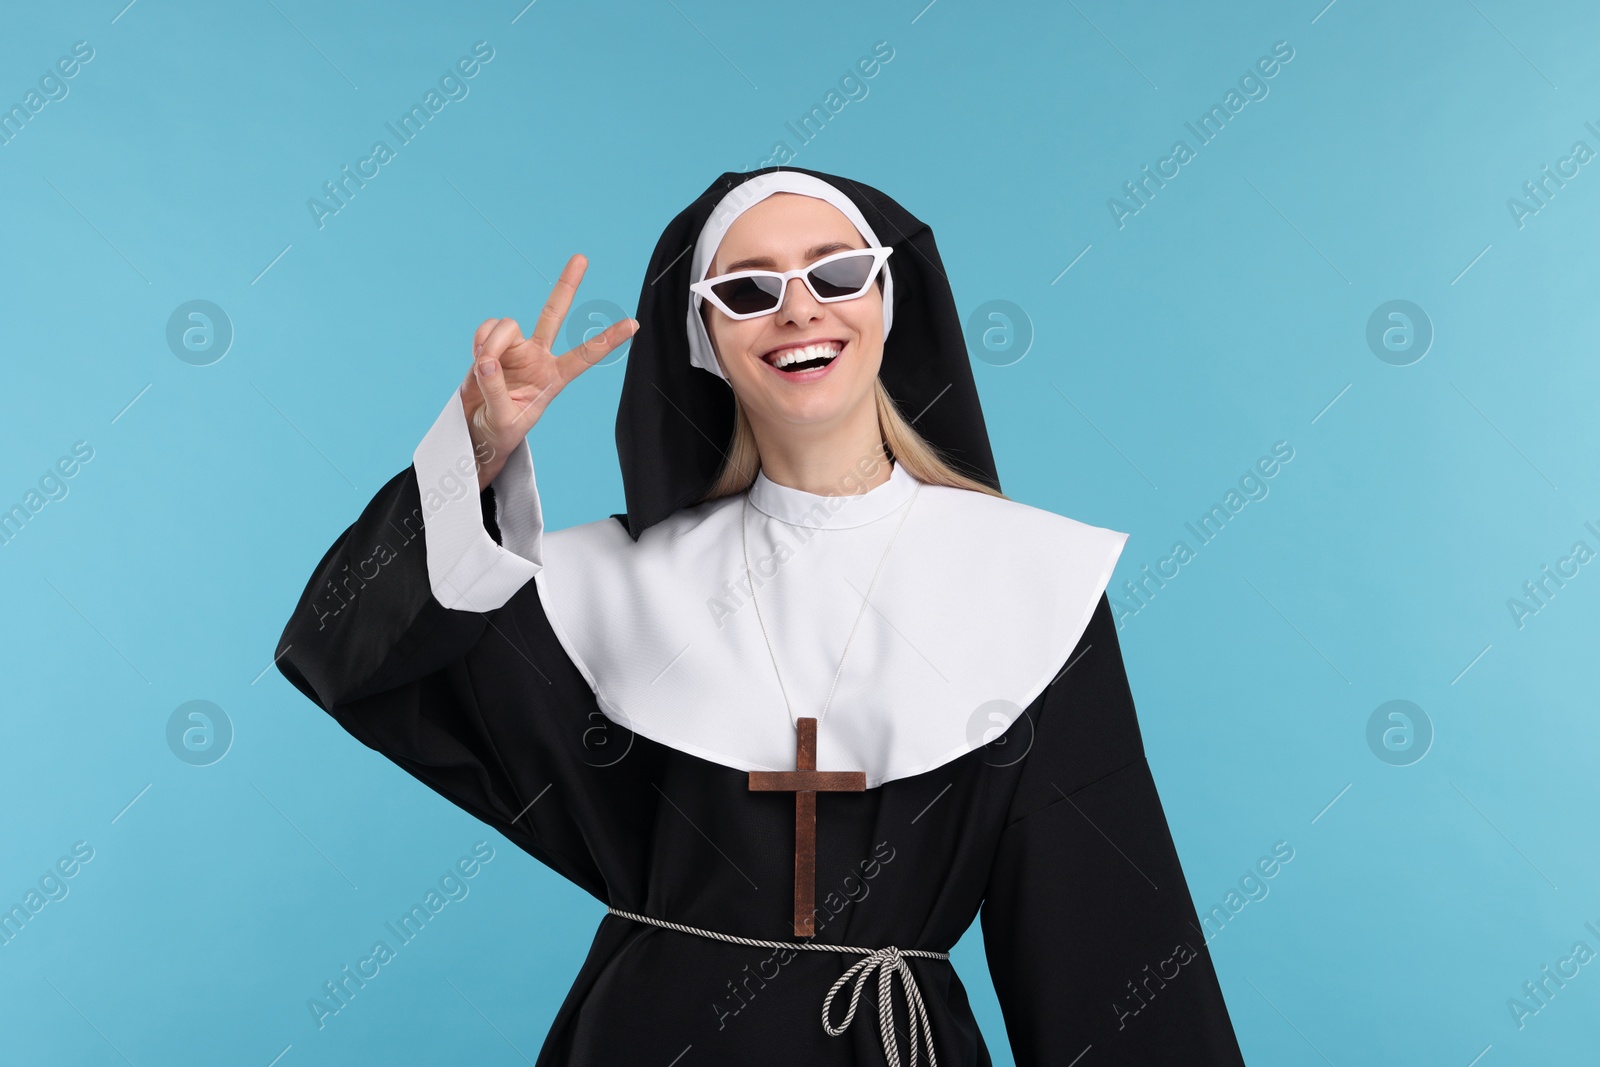 Photo of Happy woman in nun habit showing V-sign against light blue background